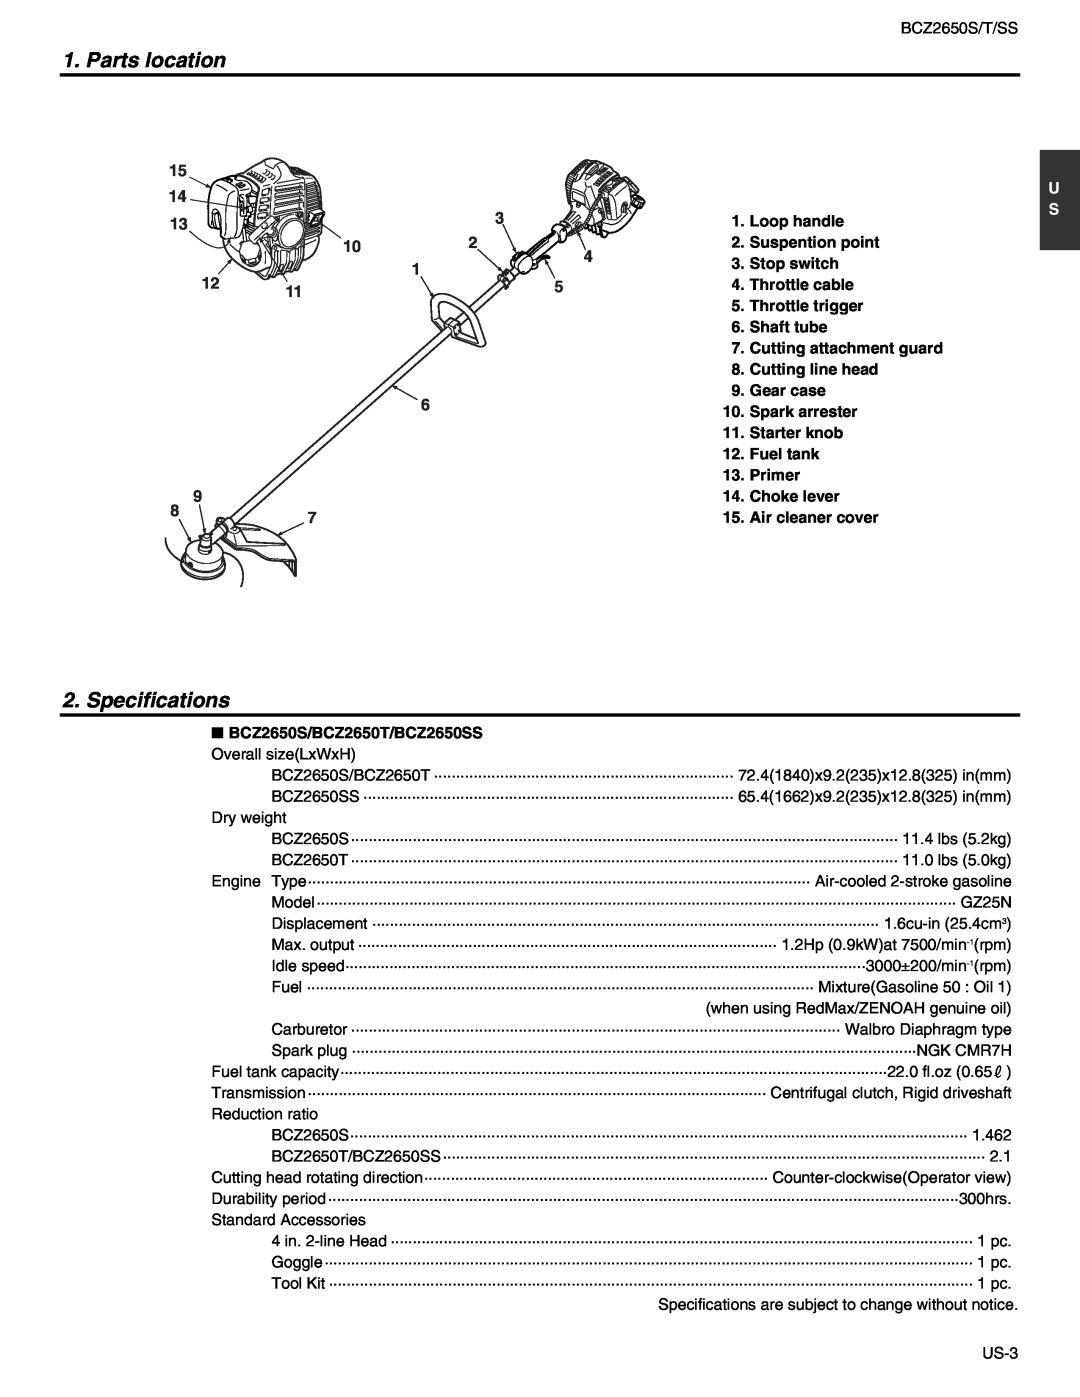 RedMax BCZ2650T, BCZ2650SS manual Parts location, Specifications 